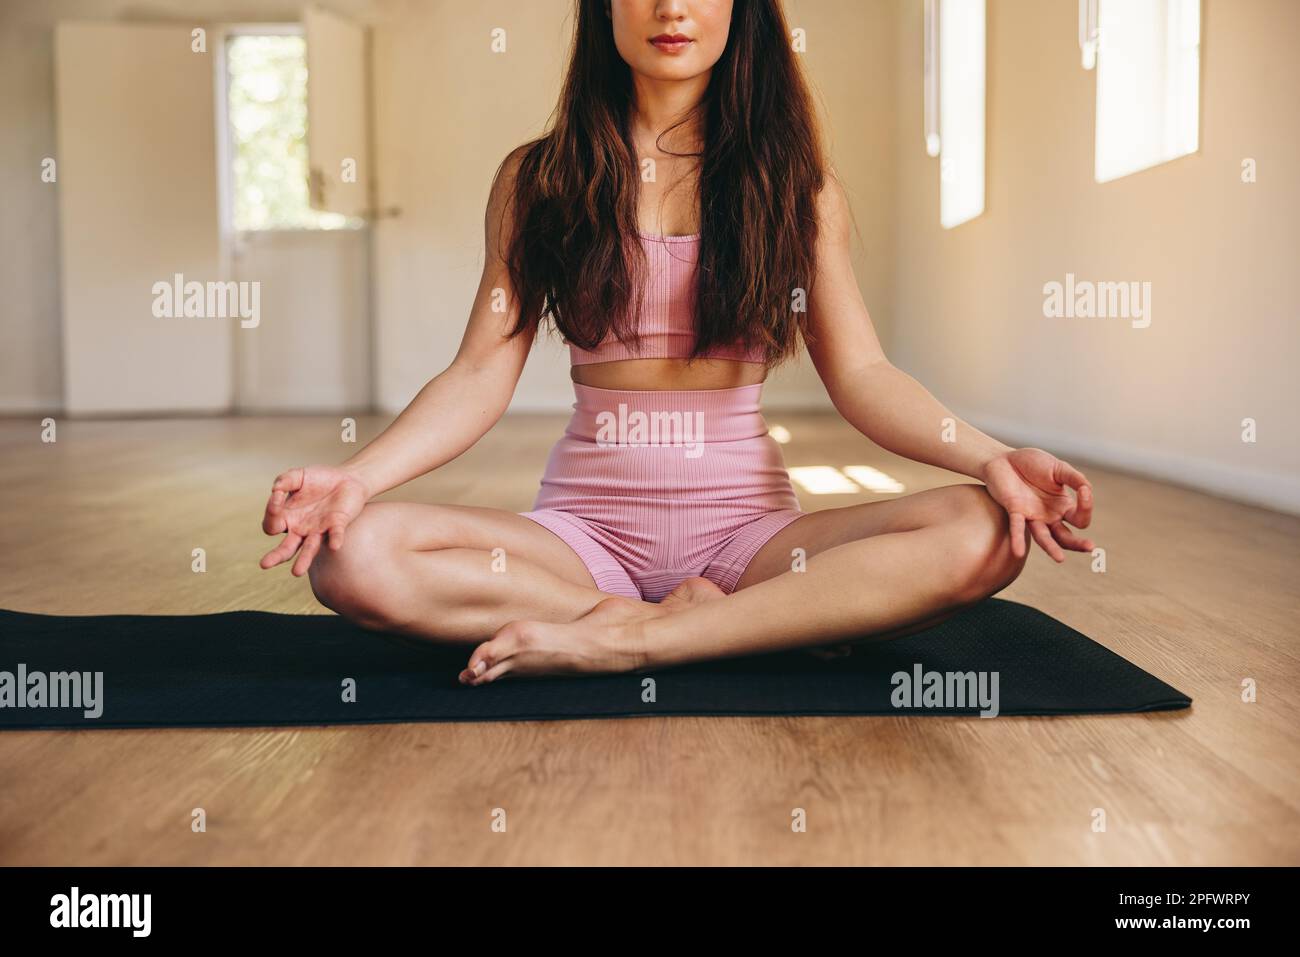 Young woman meditating while sitting in easy pose in a yoga studio. Fit young woman practicing a breathing and relaxation exercise on a yoga mat. Stock Photo